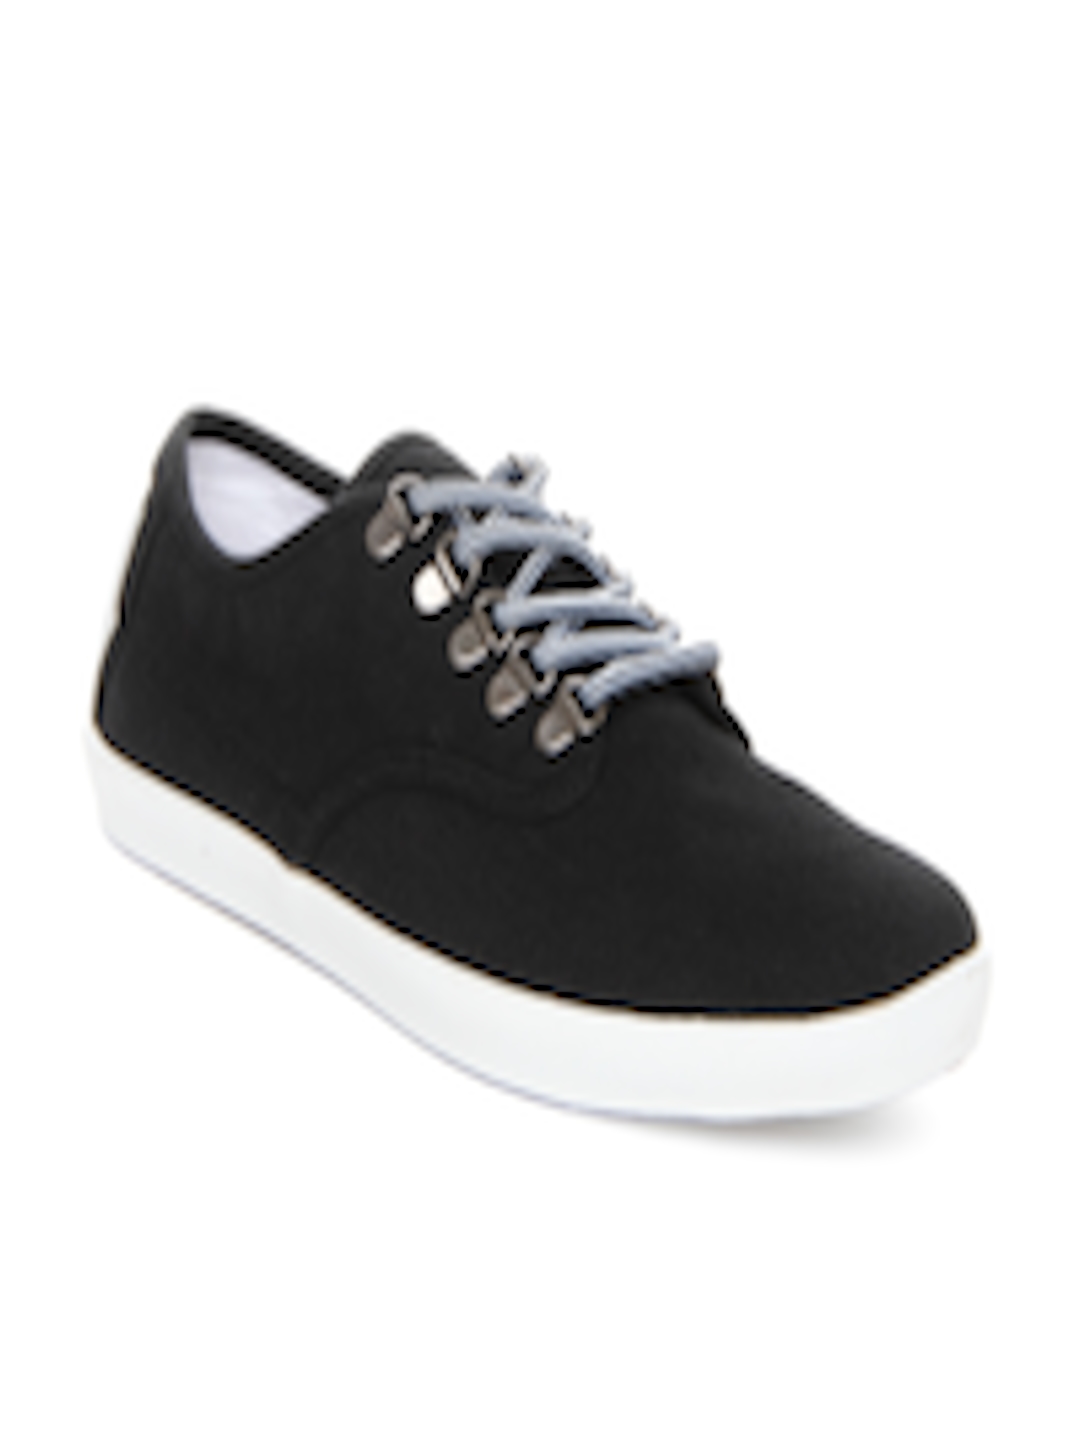 Buy Roadster Men Black Casual Shoes - Casual Shoes for Men 310880 | Myntra